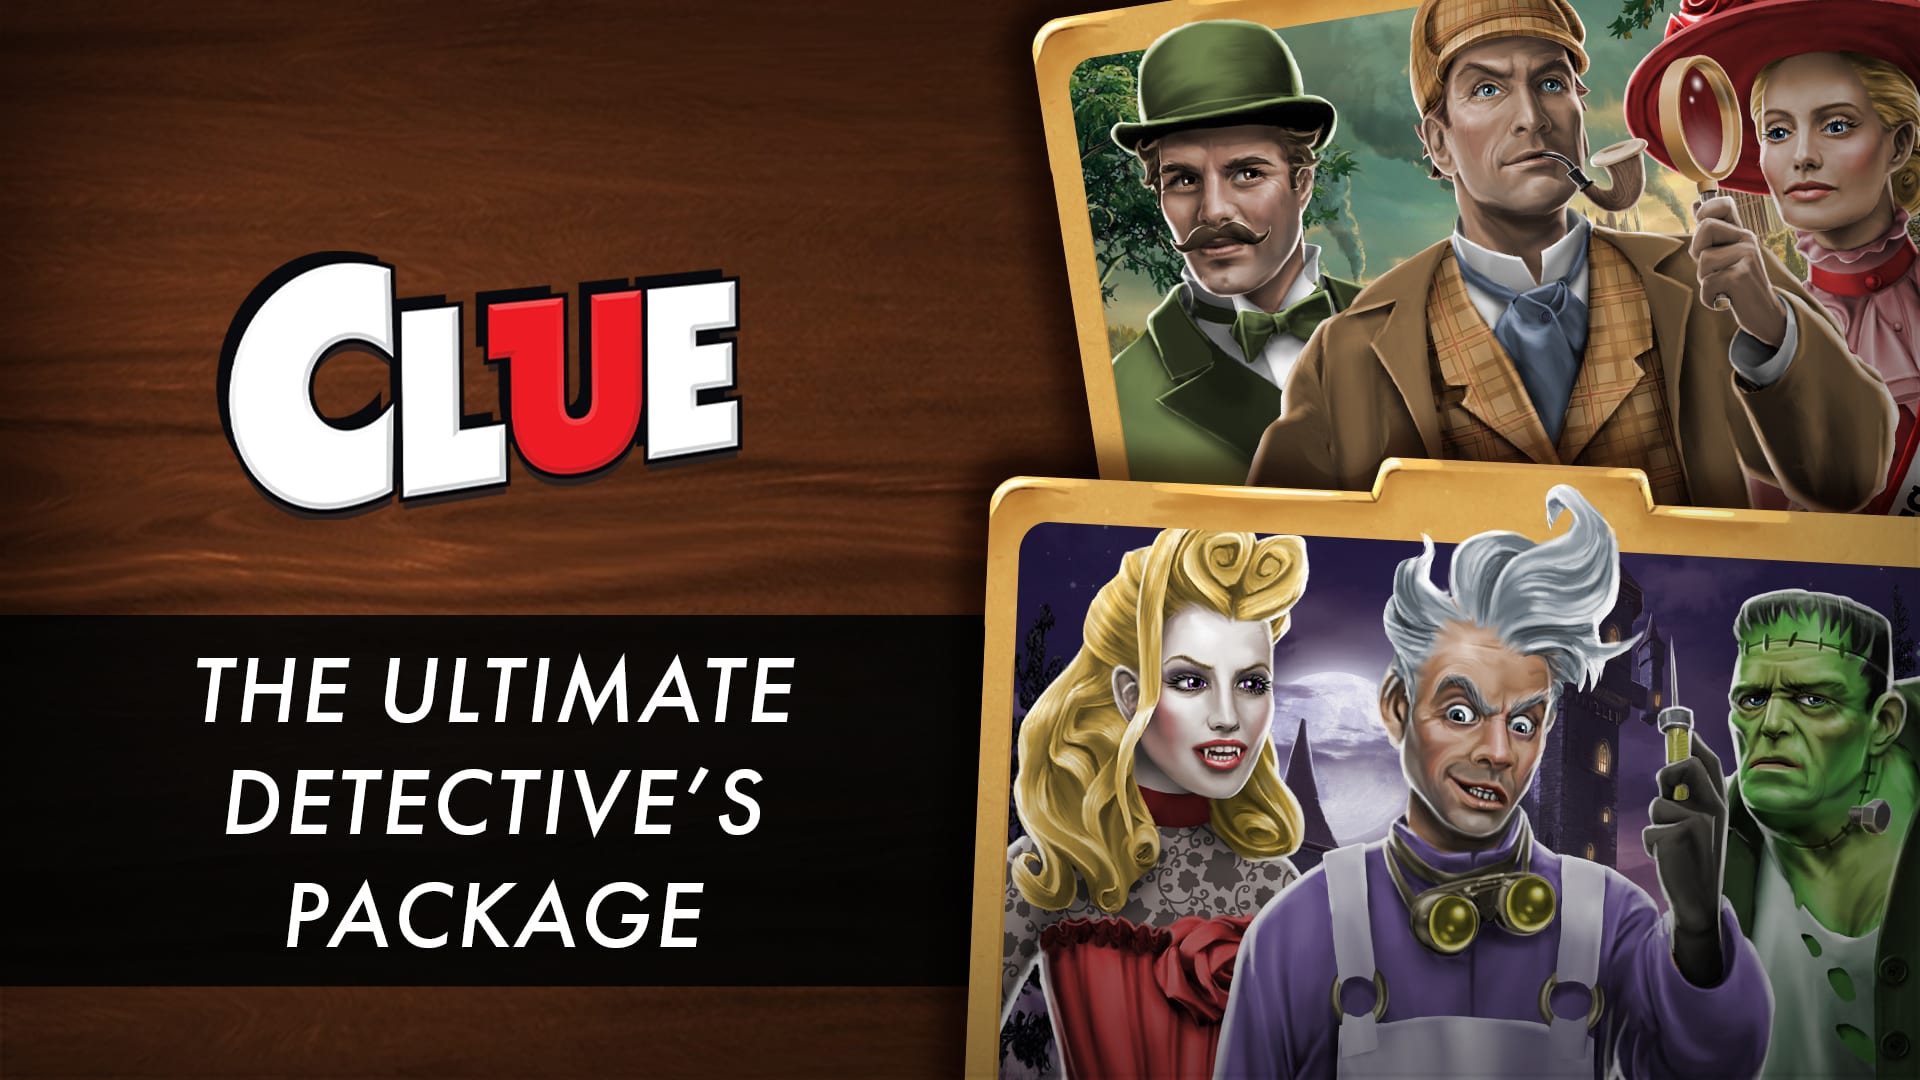 Clue: The Ultimate Detective’s Package